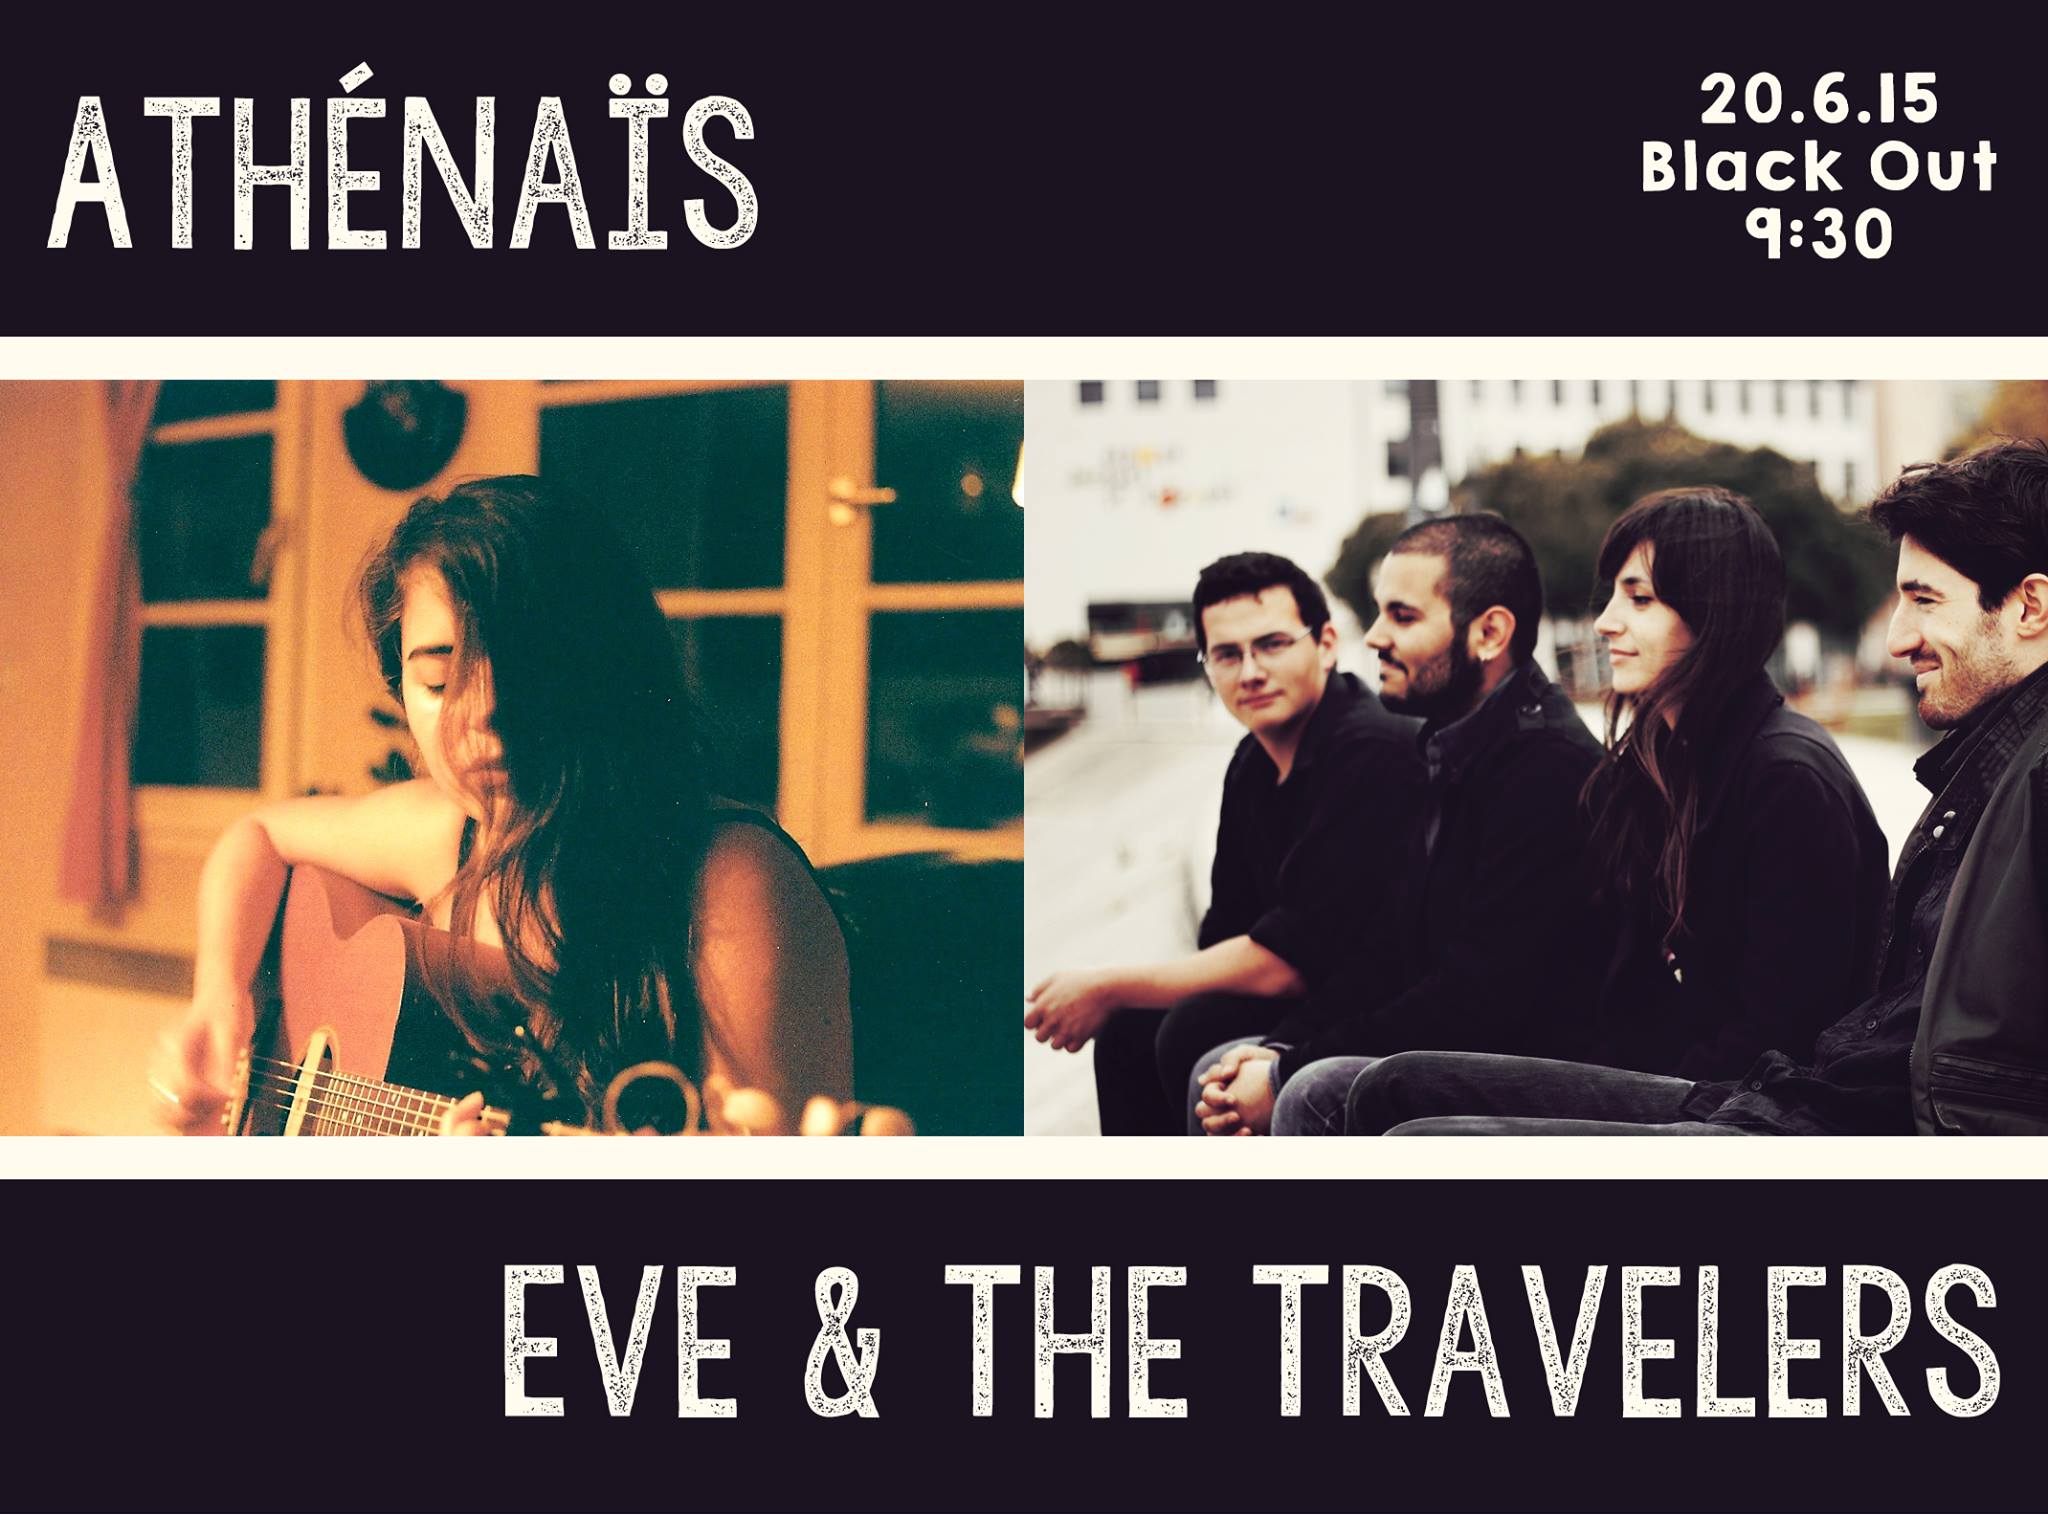 Athenaie, Eve and the travelers, Black Out.jpg